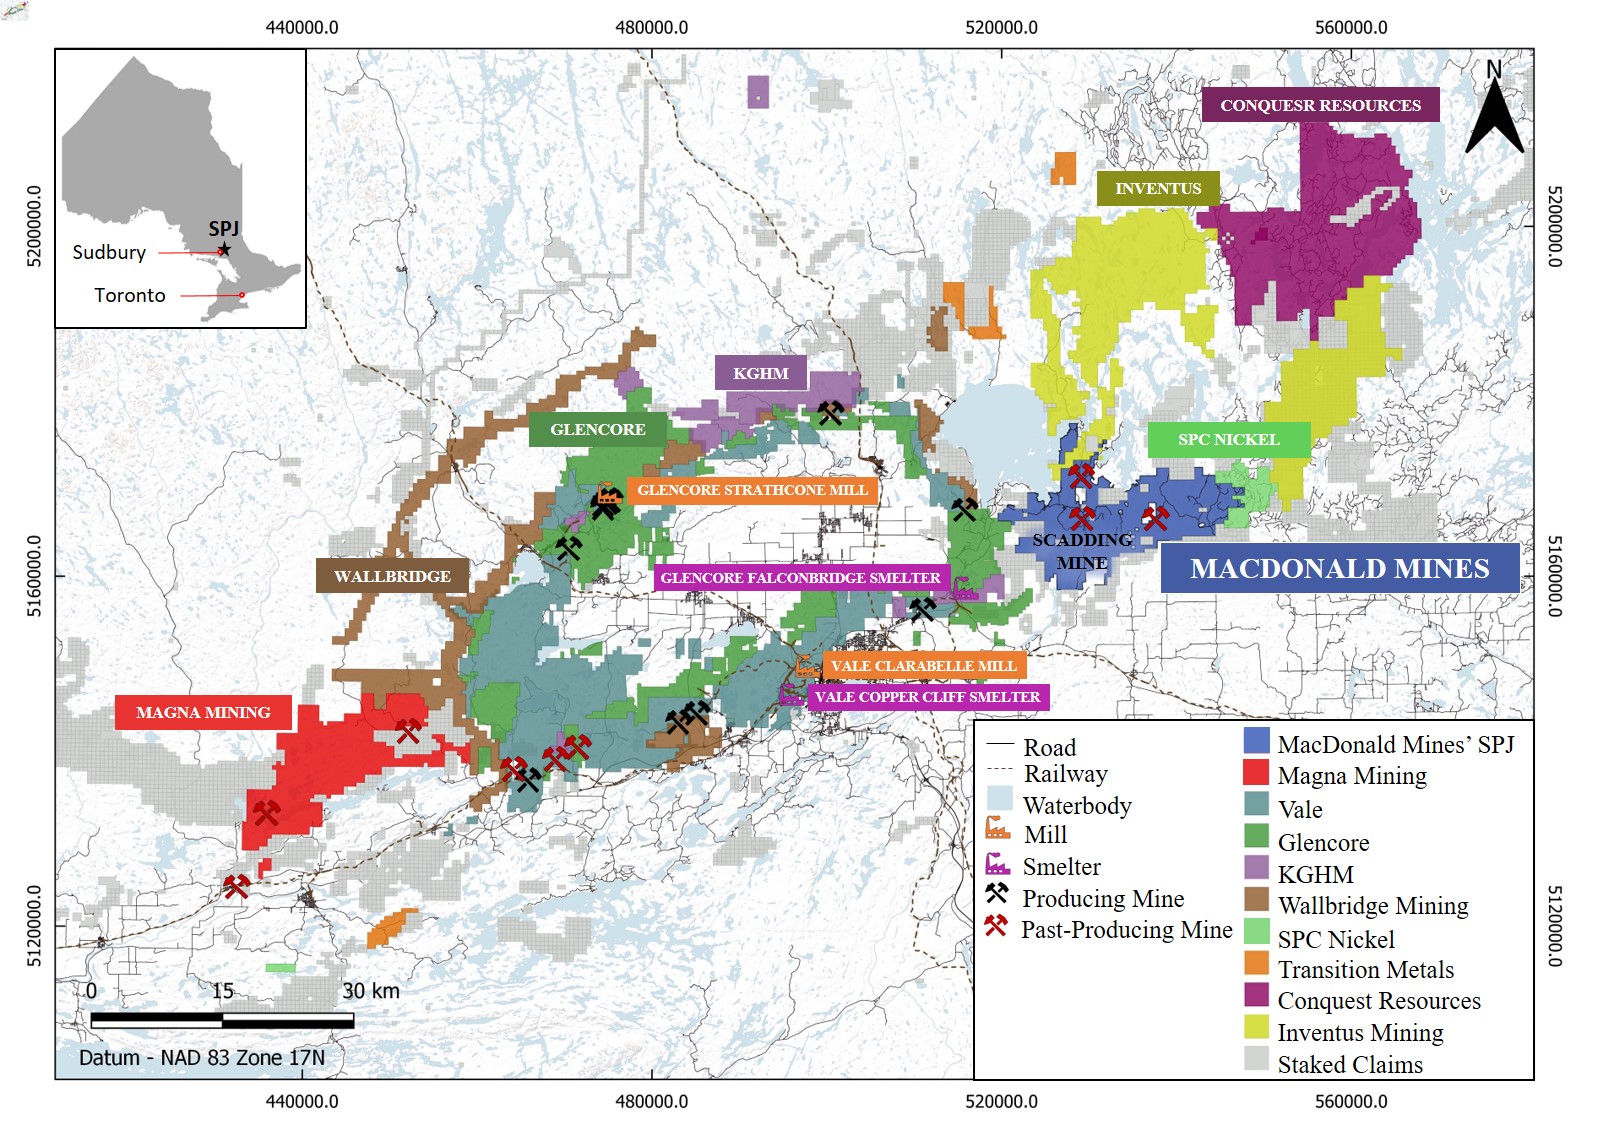 Significant exploration and infrastructure around the Sudbury Mining District. *The reader is cautioned that the above information is not necessarily indicative of comparable mineralization on BMK’s SPJ property.